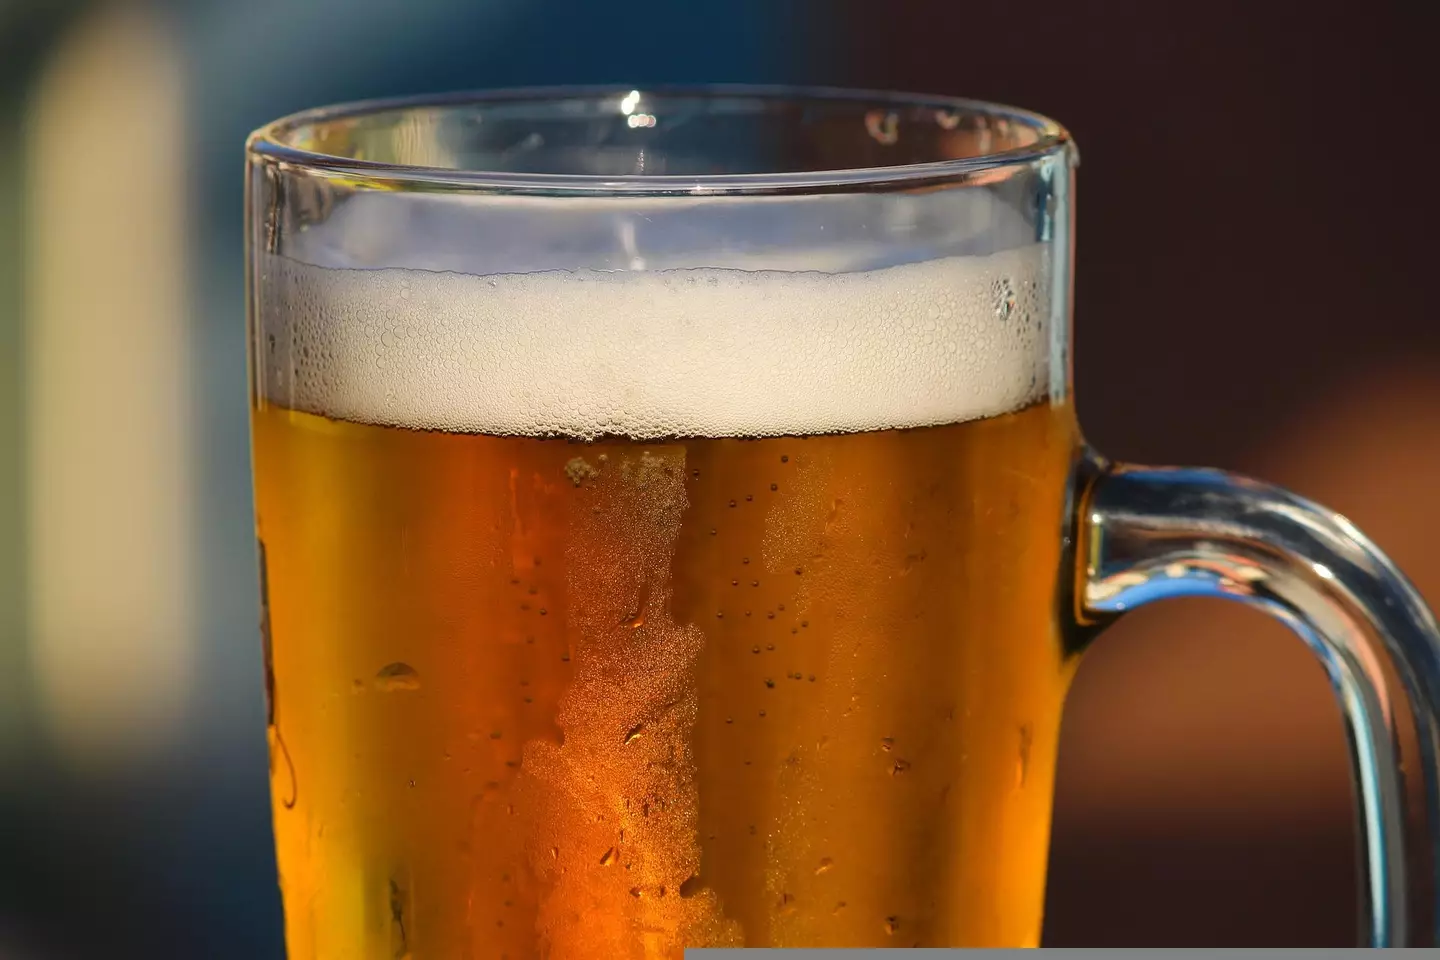 Beer prices have increased due to the rising cost of ingredients.